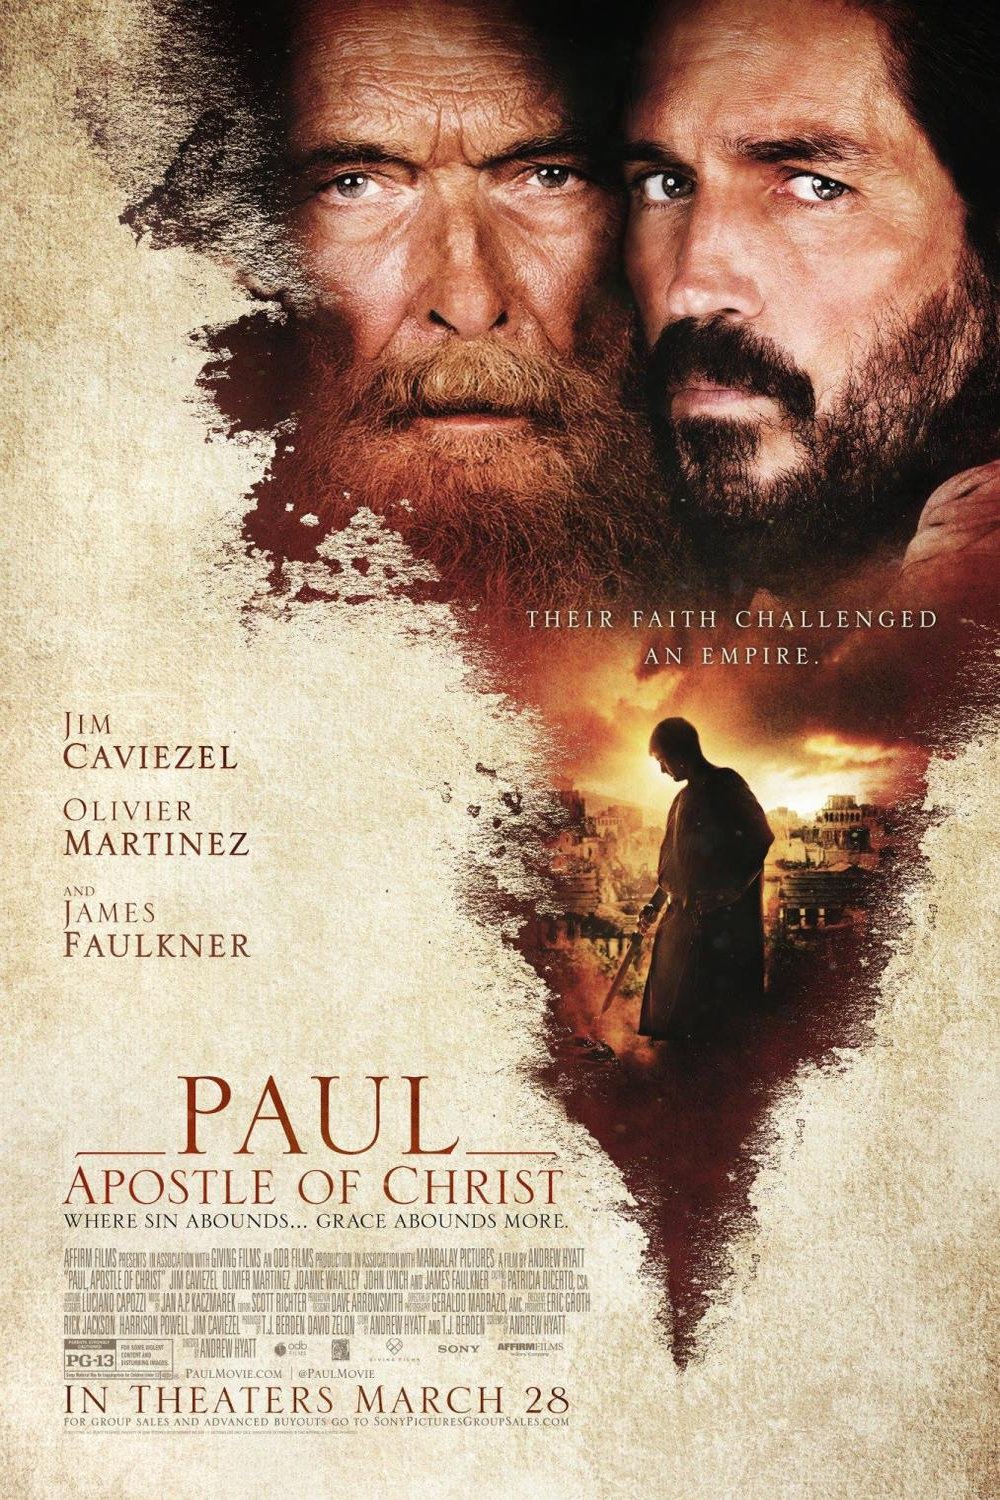 Poster of the movie Paul, Apostle of Christ